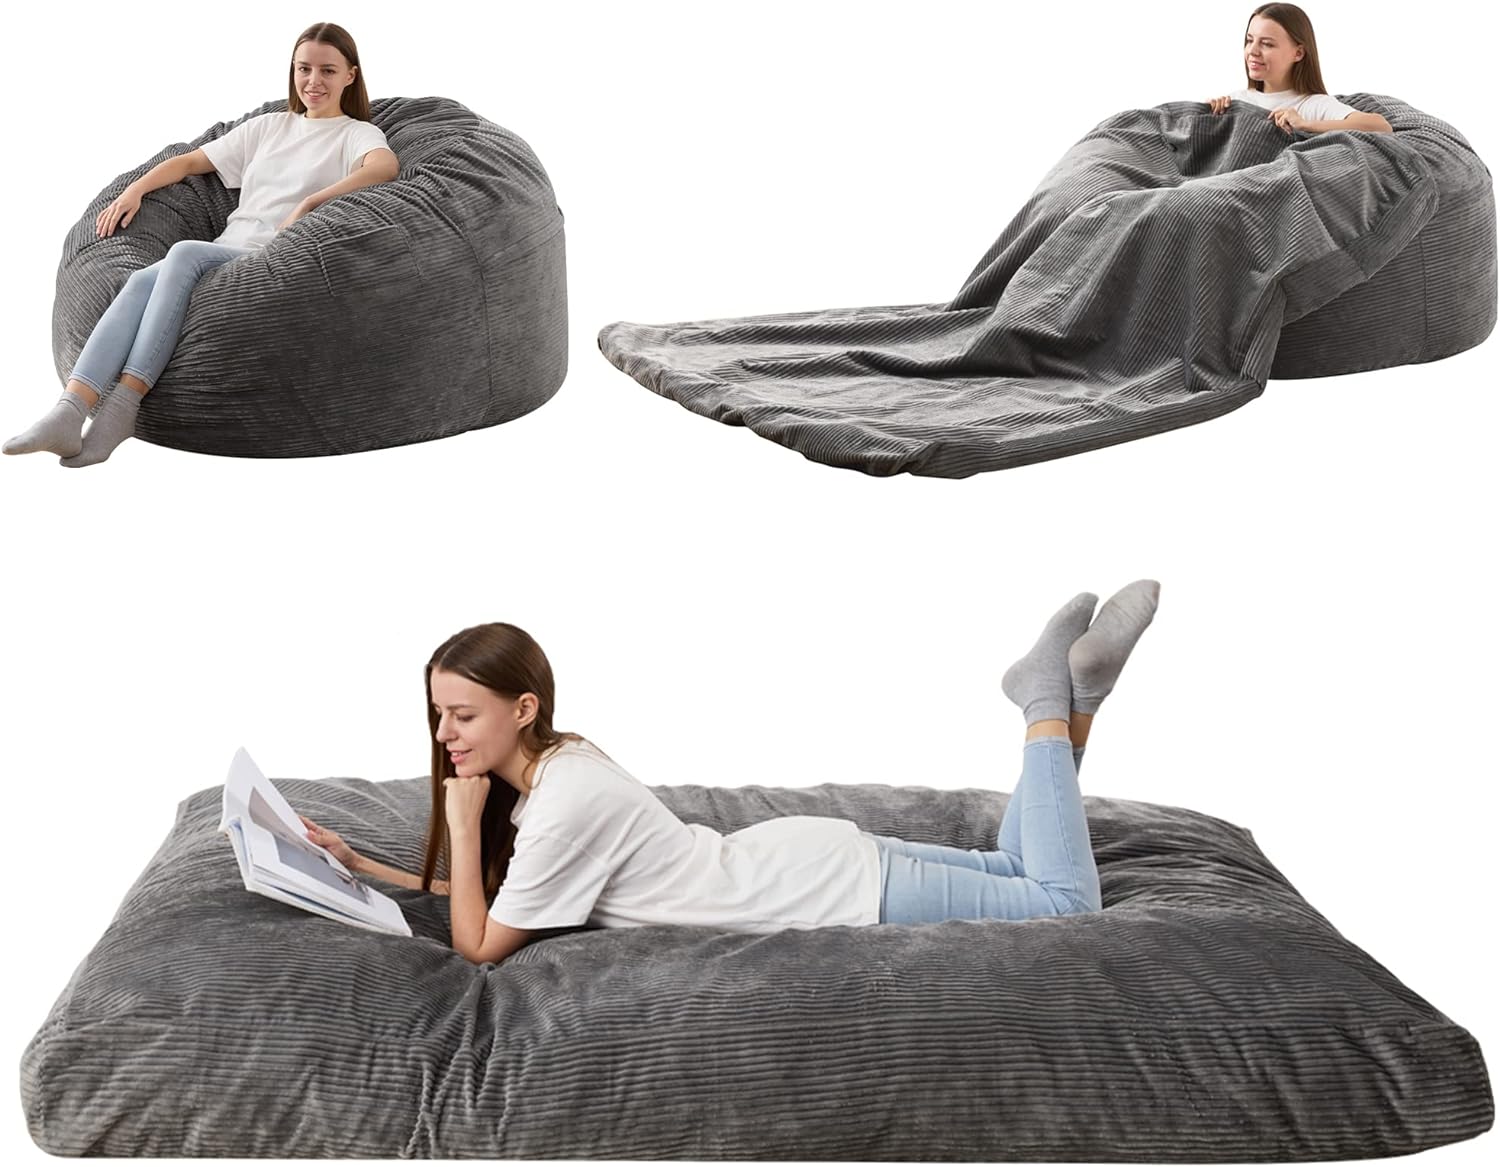 HABUTWAY Bean Bag Chair, Giant Bean Bag Chair with Washable Corduroy Cover Ultra Soft, Convertible Bean Bag from Chair to Mattress, Huge Cordoroys Bean Bags for Adult, Couples, Family- Grey Full